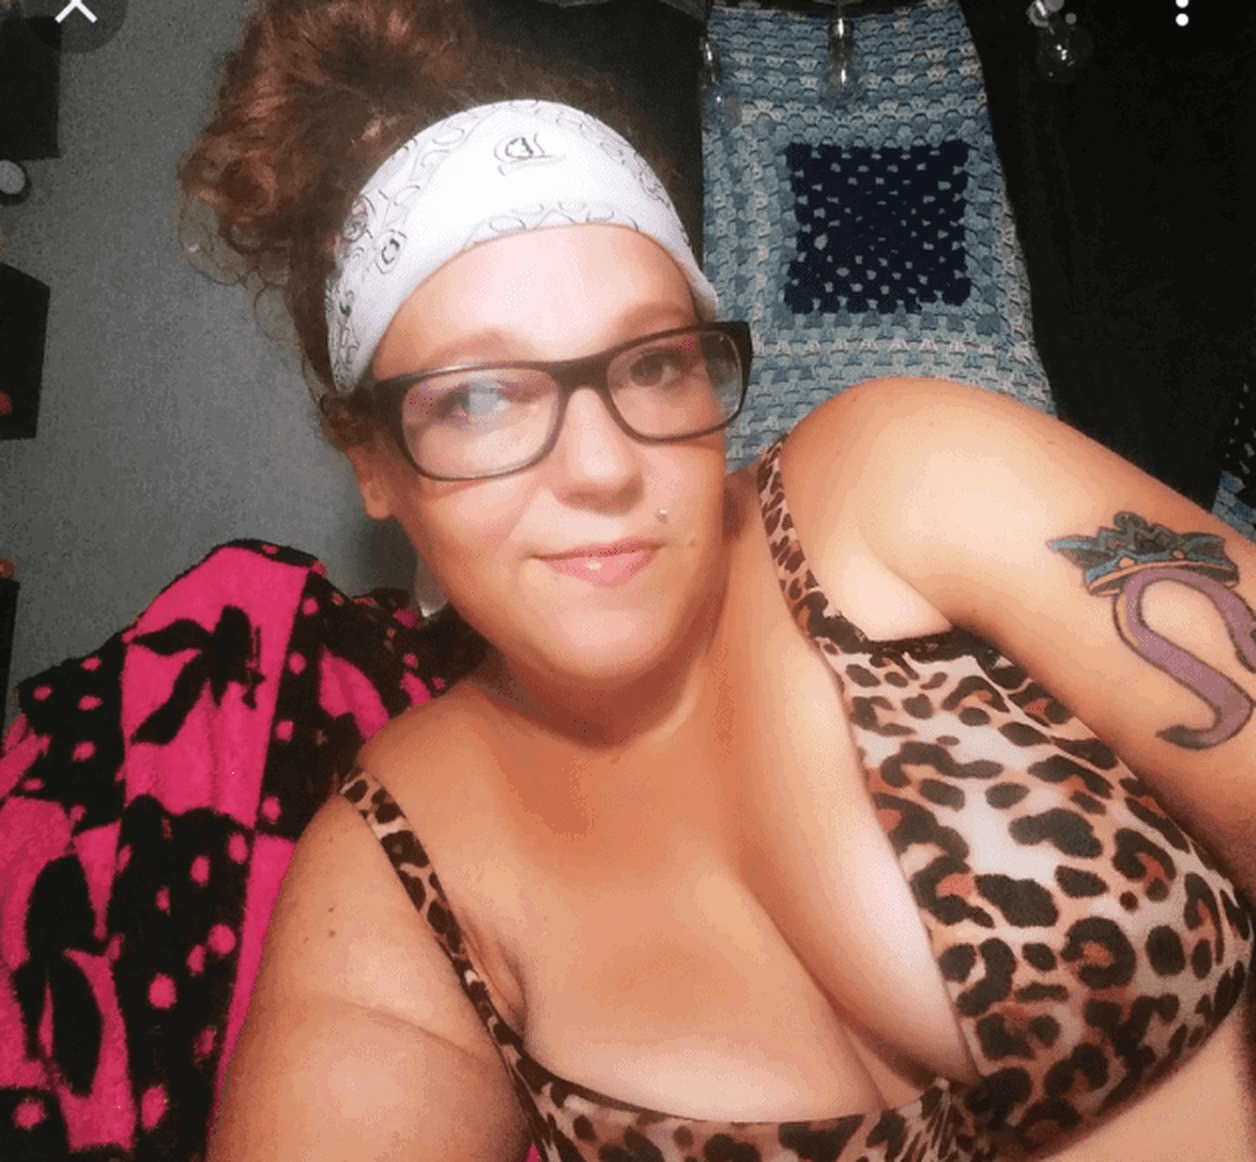 Photo by Kepi Carter with the username @Kepicarter, who is a star user,  September 19, 2021 at 5:05 AM. The post is about the topic MILF and the text says 'Im now on #loyalfans i love this site and you will too. Use this link to sign up (ITS FREE) and get one of my squirting videos FREE!!!  https://www.loyalfans.com/register?ref=QXlw5oqeIp8ANlVNOEUieNftP49IklcLdYEaBdFT54Q   #bbw #milf #fanclubs #fetishmodel..'